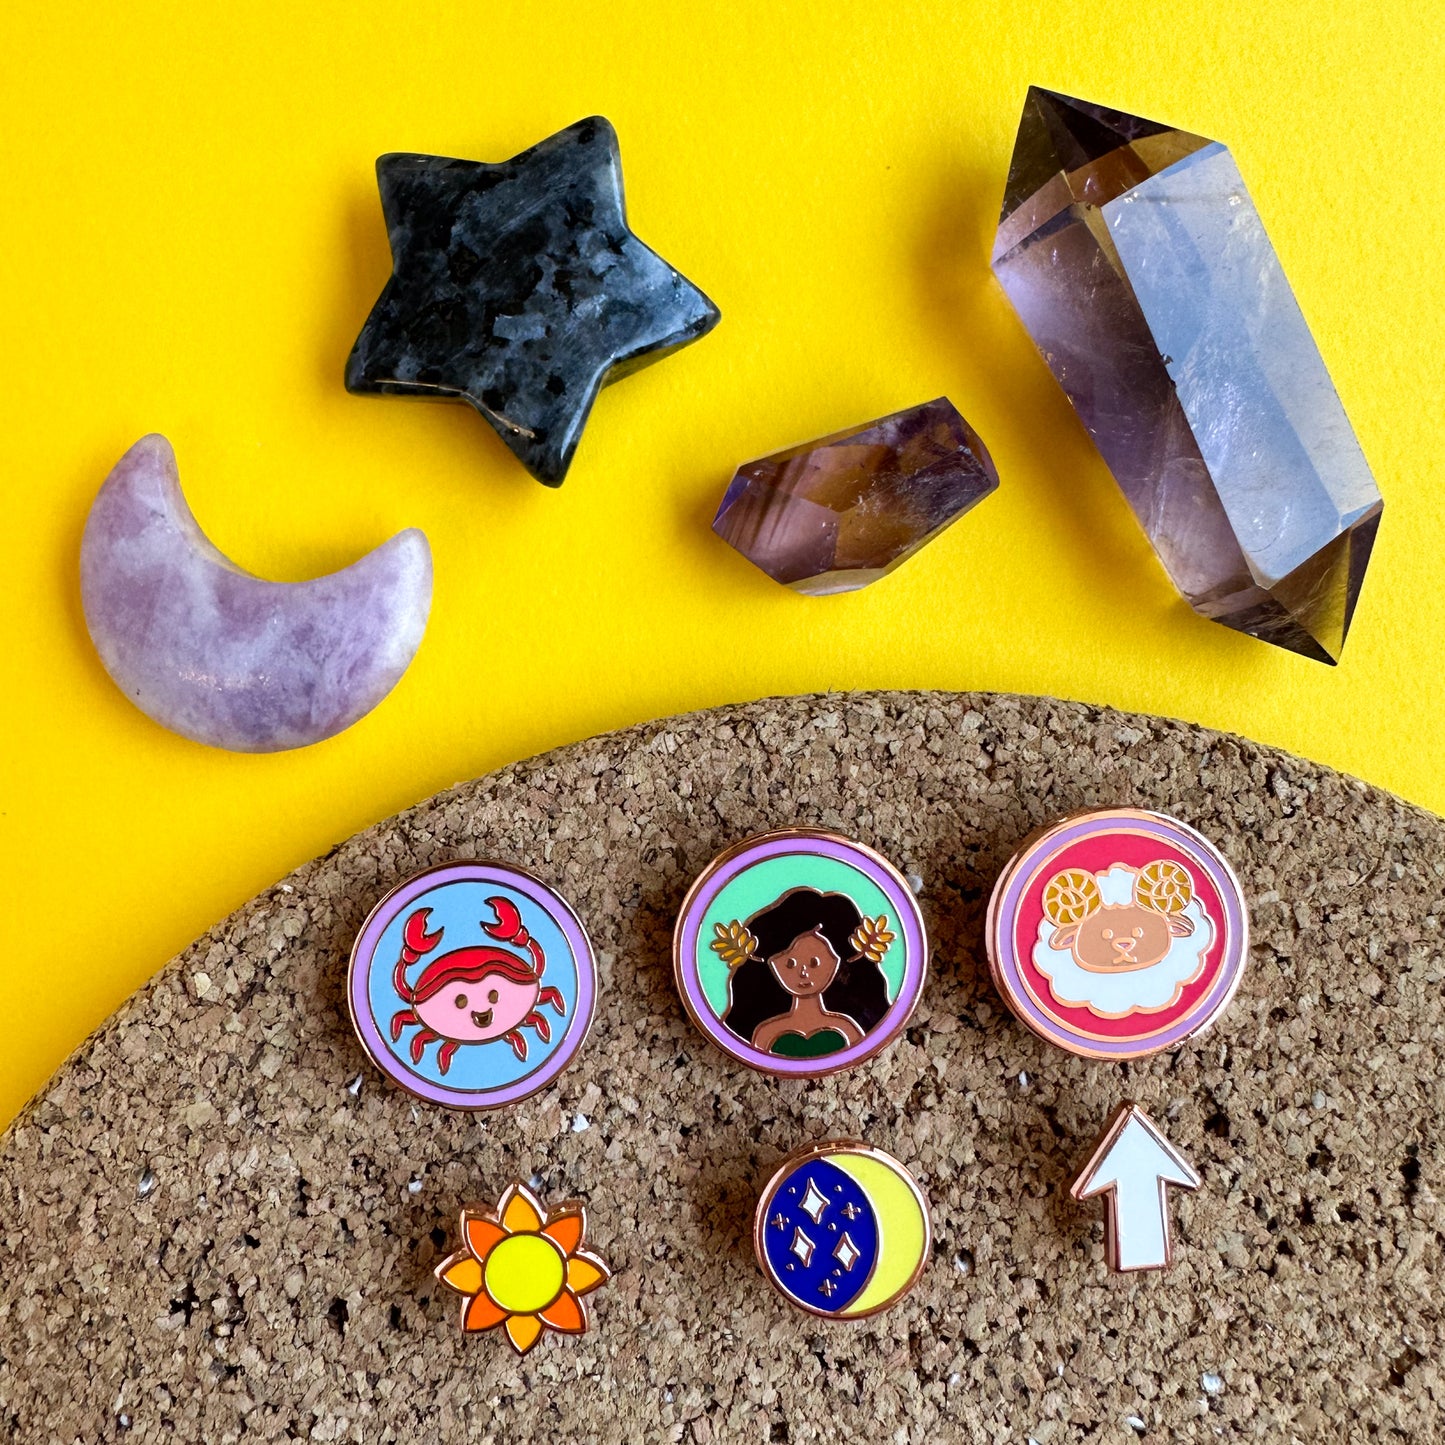 A set of six enamel pins, three are circles with cute illustrations representing zodiac signs. and the other three are shaped like a sun, moon, and rising arrow. The pins are on a corkboard underneath crystals shaped like a moon, sun, and point